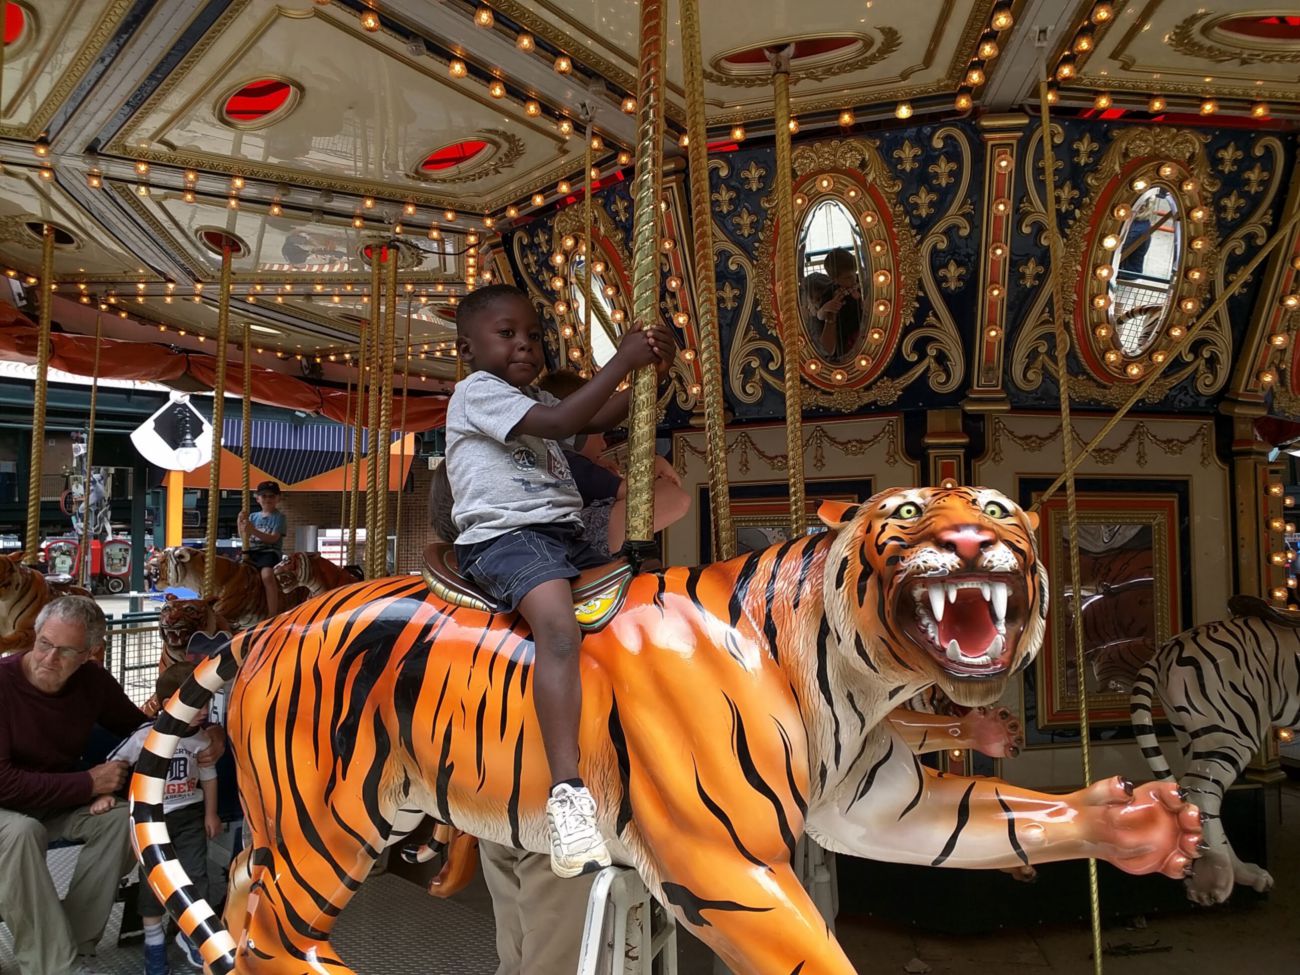 There are two images of the same scene.  The scene is a boy on a carousel riding a fake tiger. 